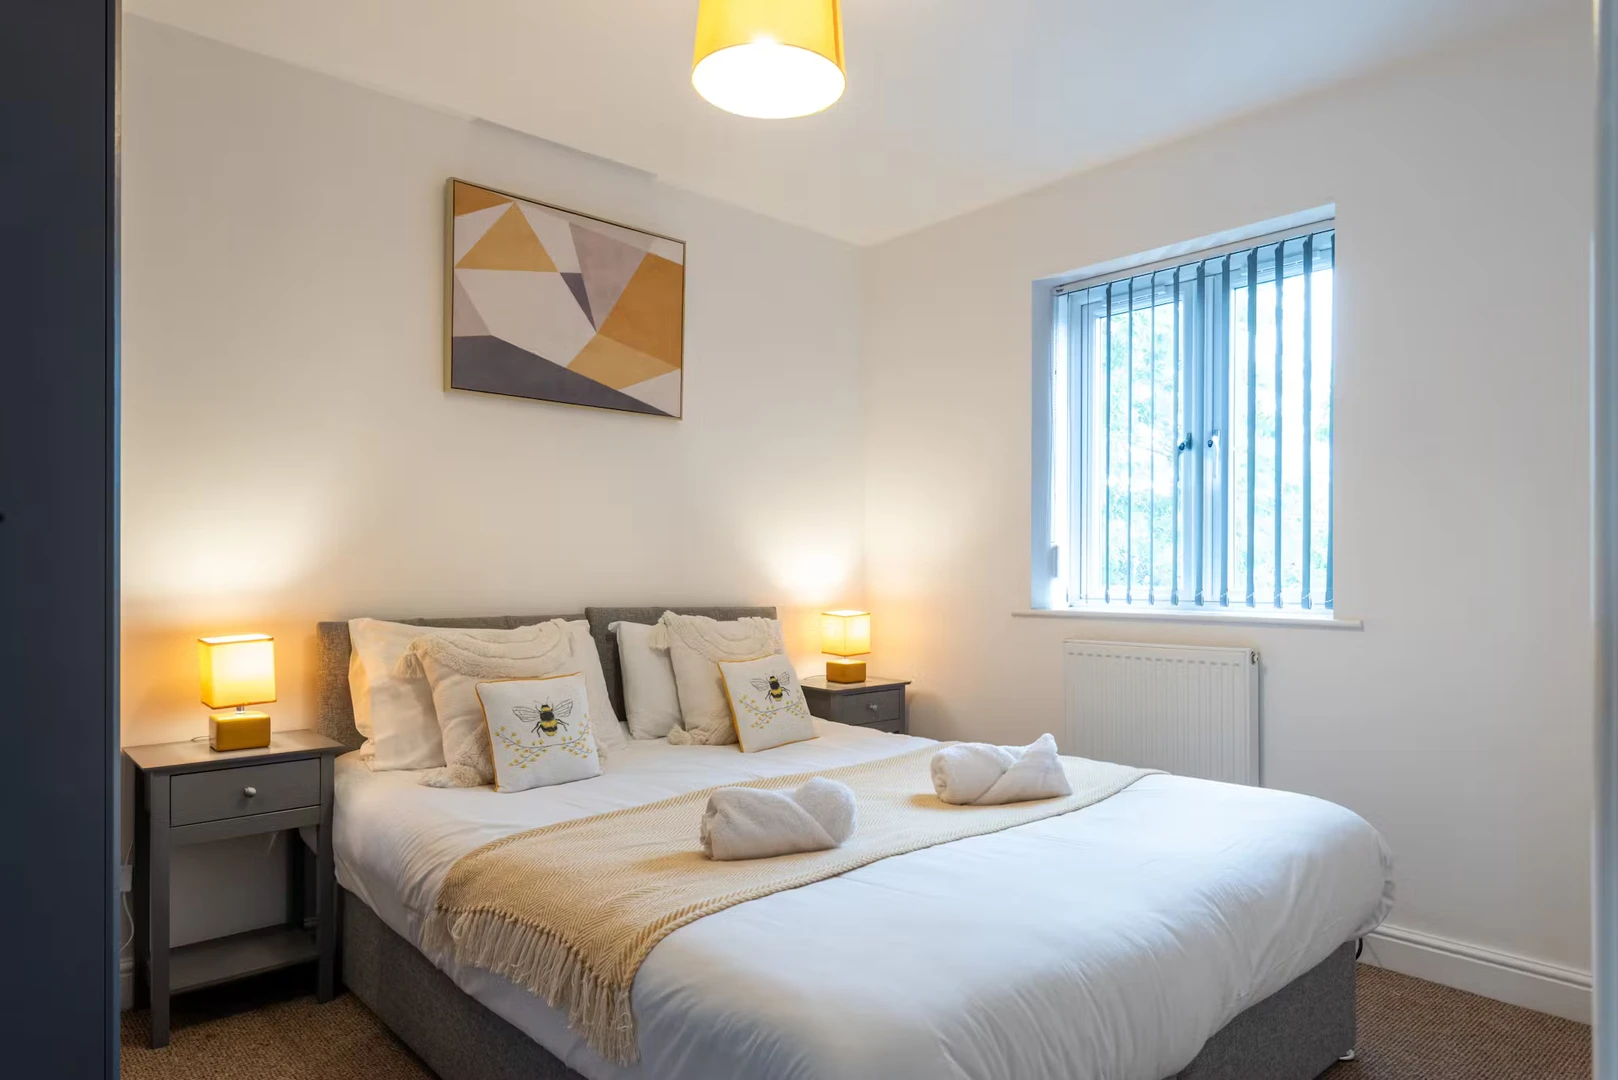 Accommodation in the centre of Derby